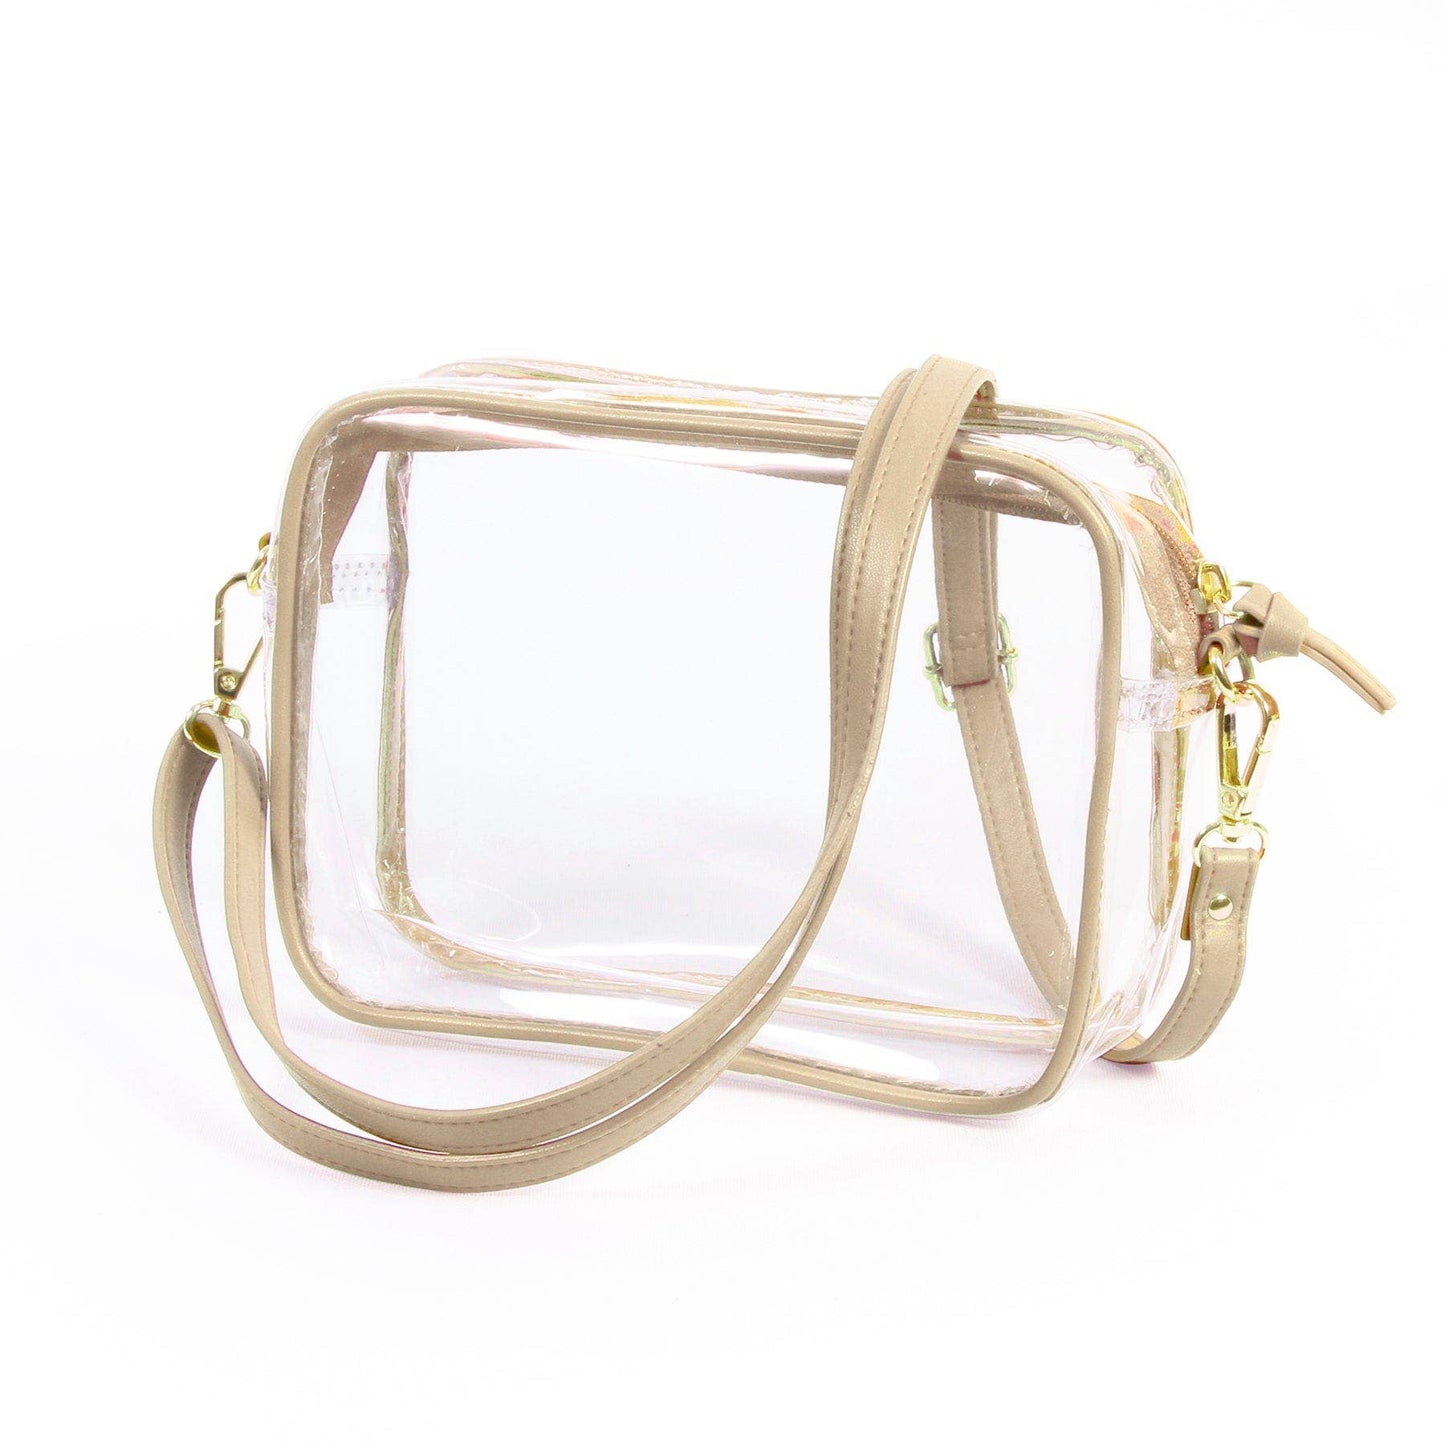 Bridget Clear Purse with Vegan Leather Trim and Straps - Gold